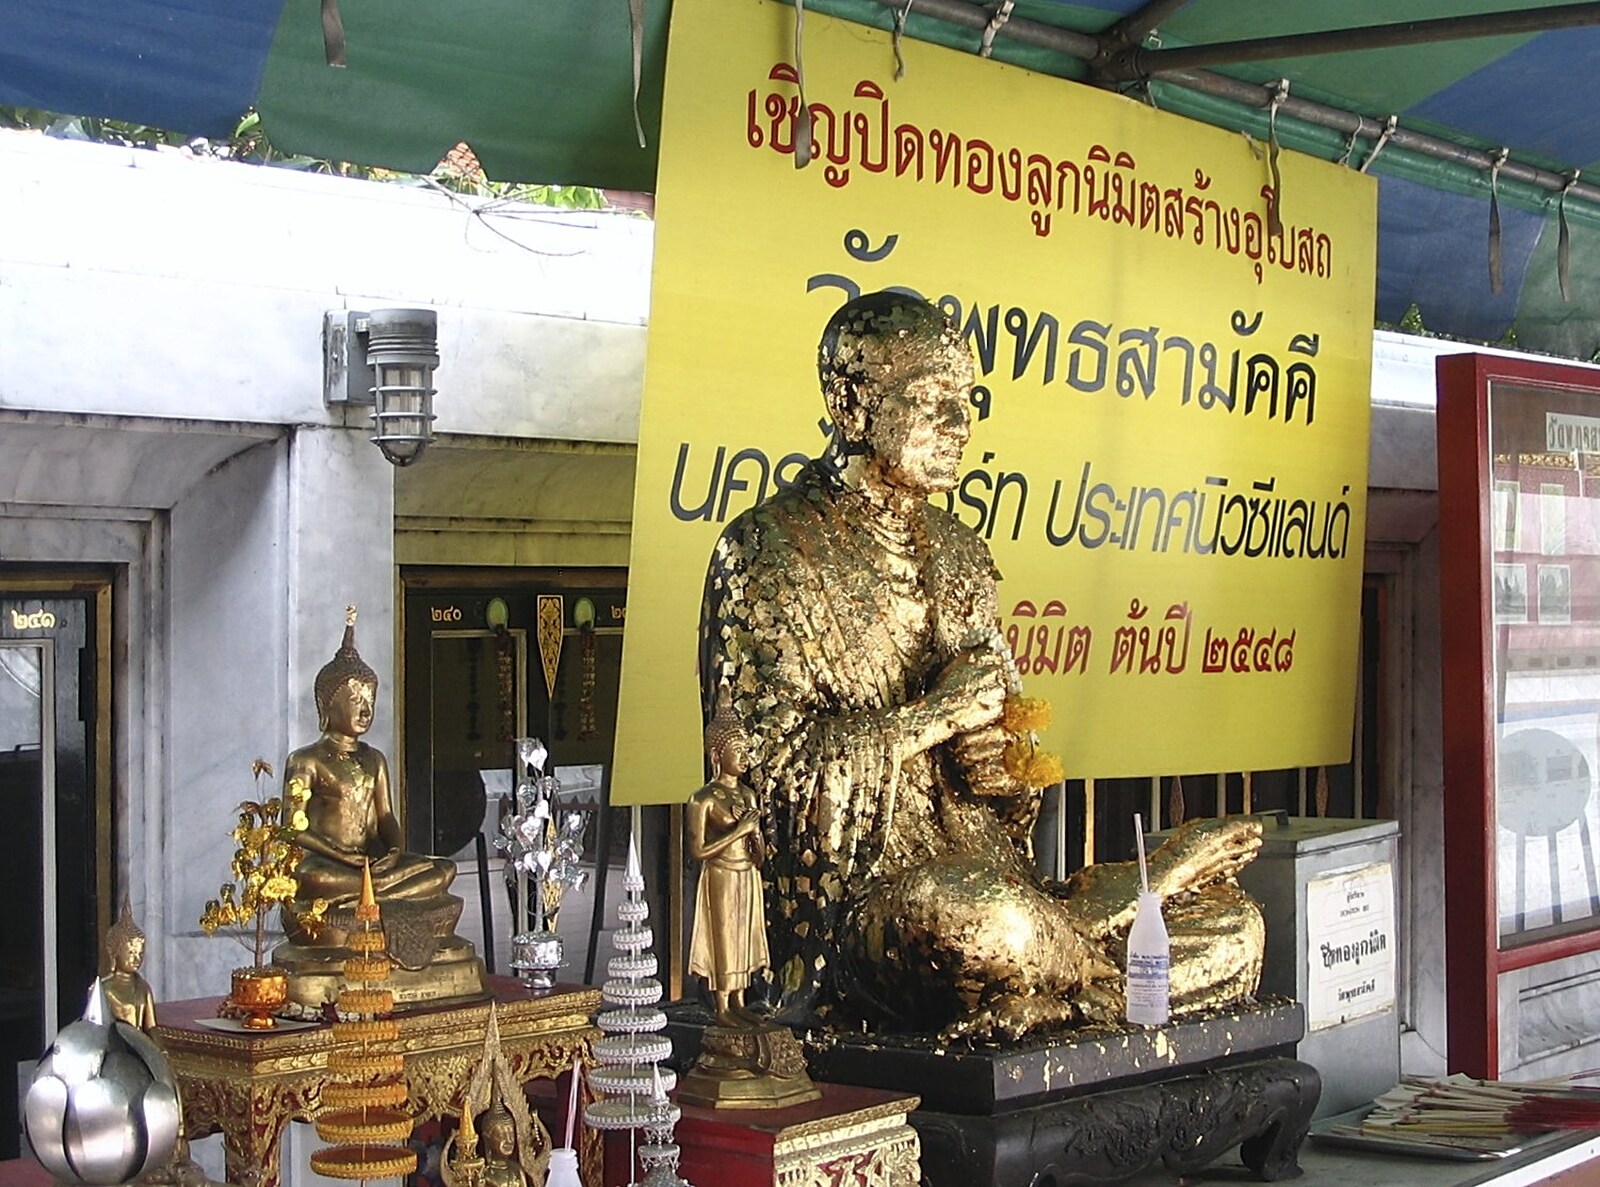 Another gold-leafed statue from A Working Trip to Bangkok, Thailand - 2nd October 2004